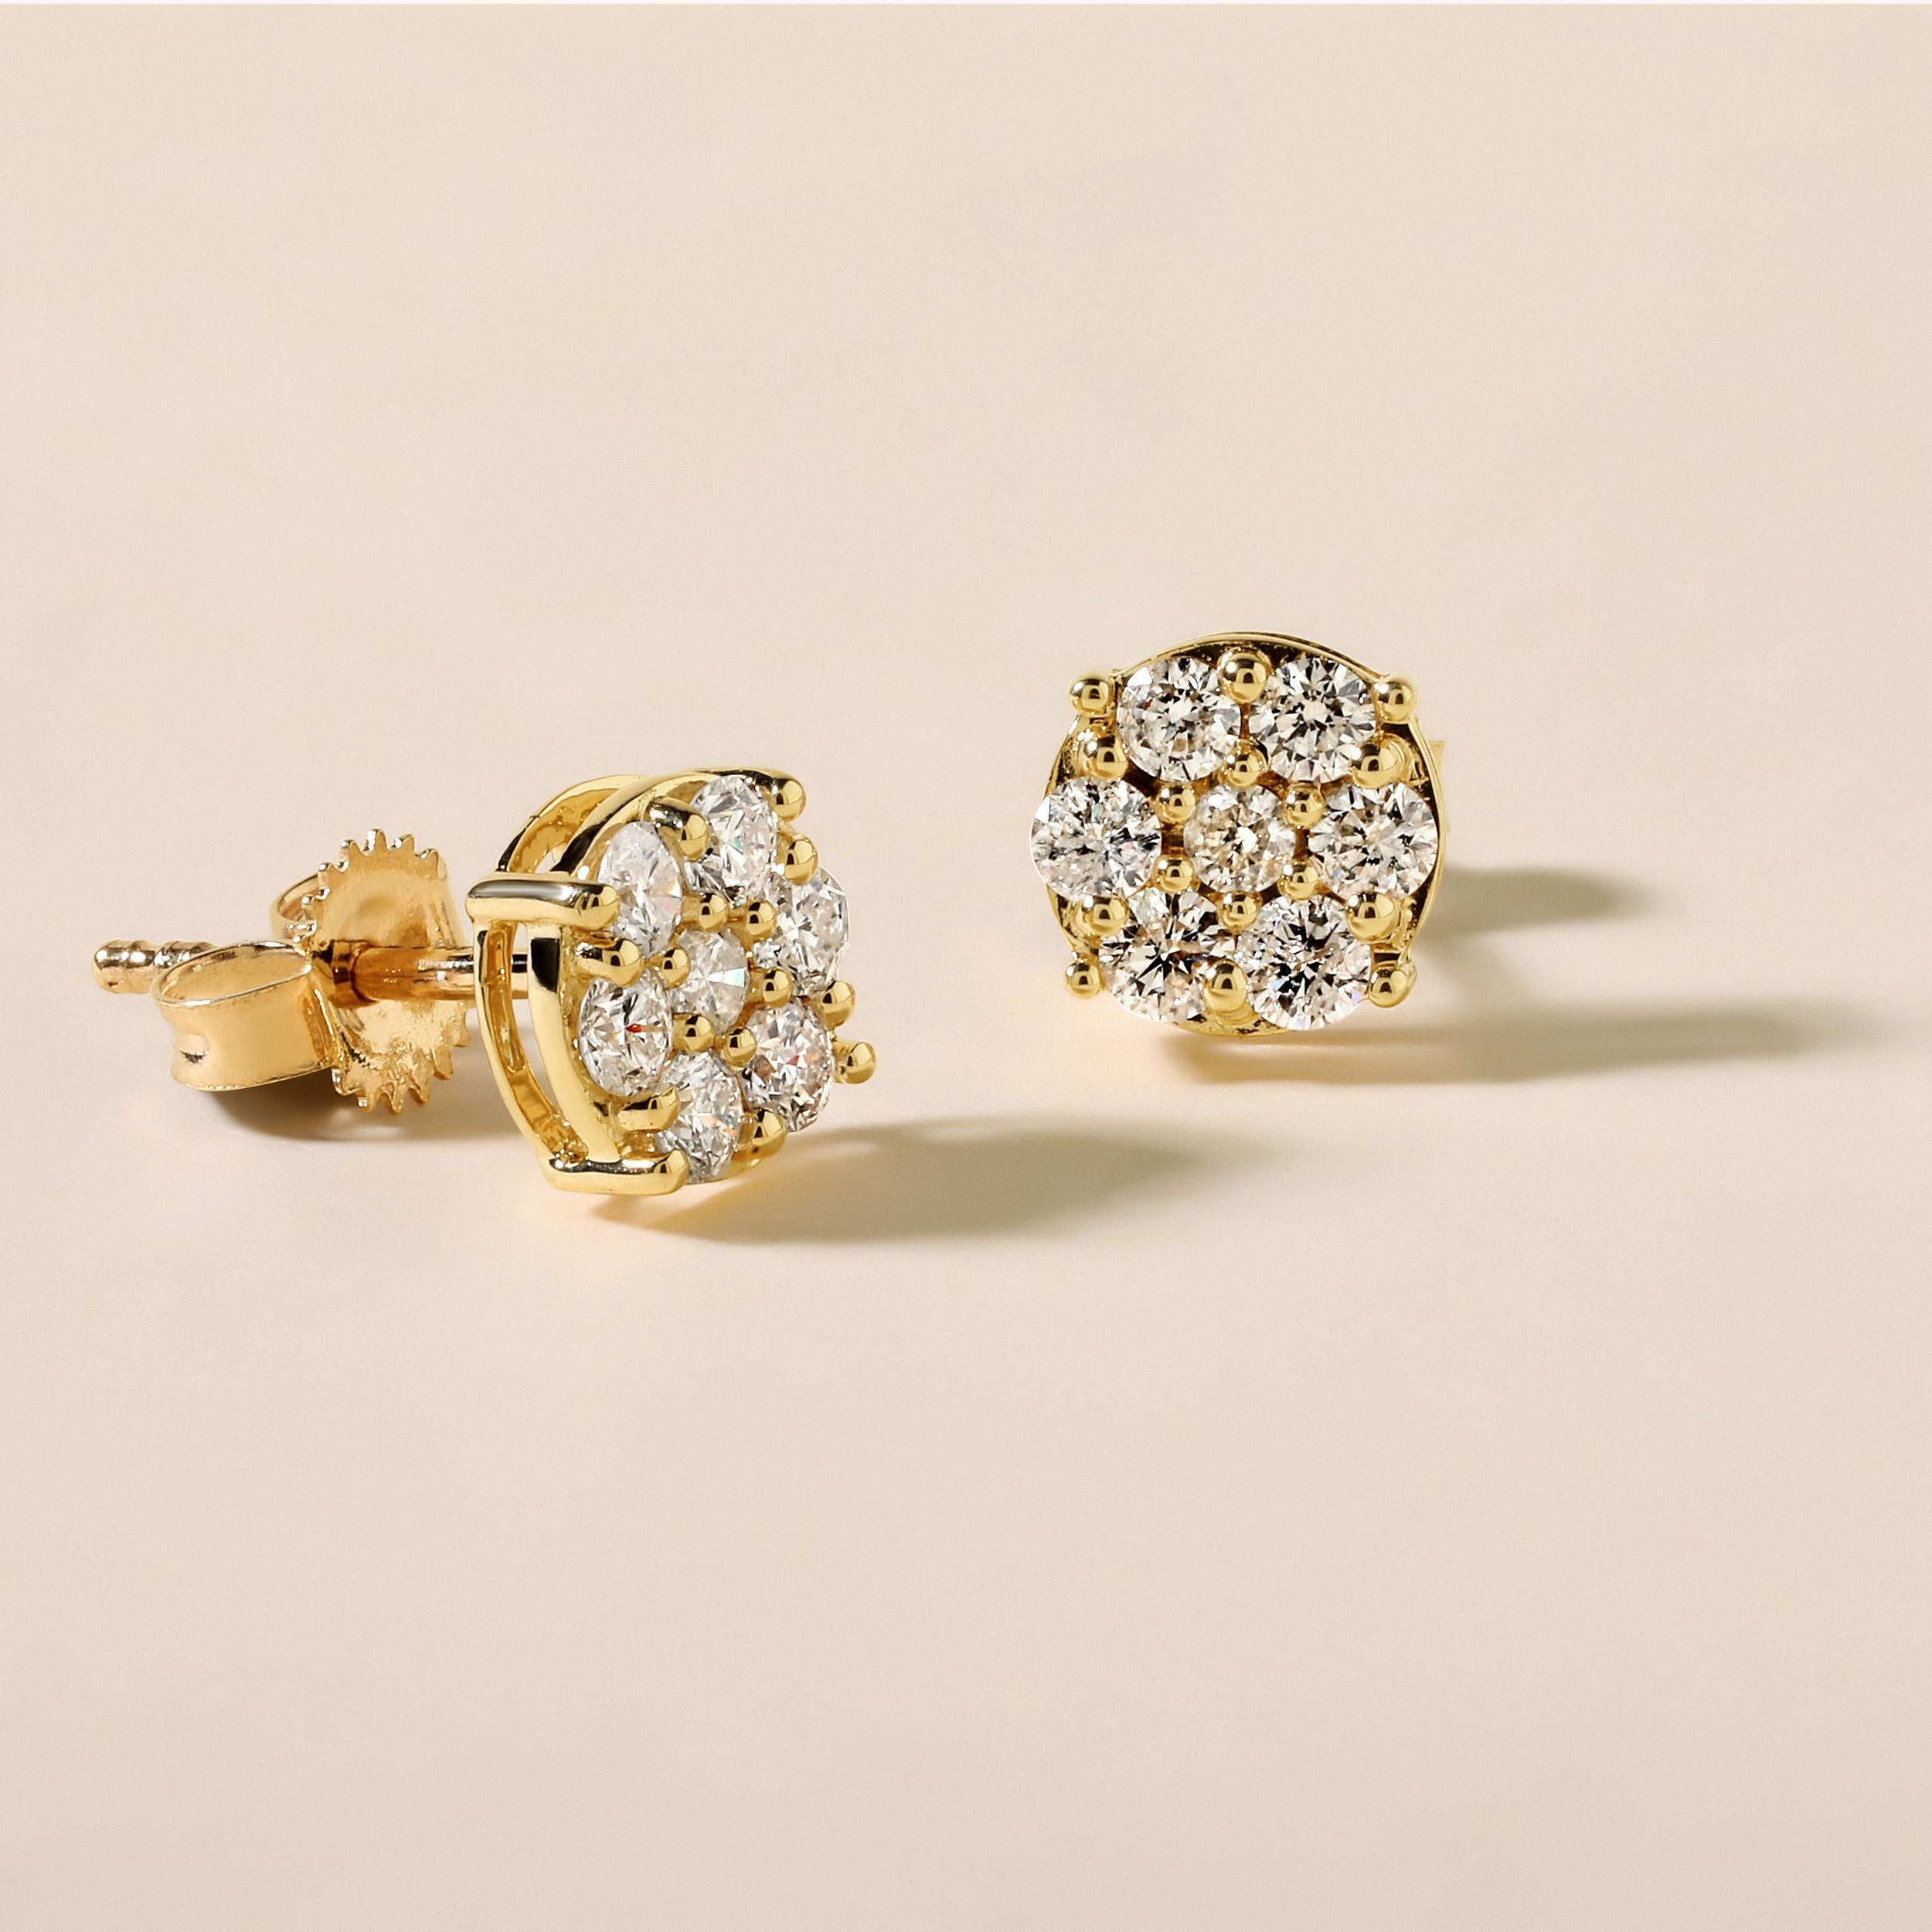 Crafted in 1.22 grams of 14K Yellow Gold, the earrings contains 14 stones of Round Diamonds with a total of 0.53 carat in F-G color and I1-I2 clarity.

This jewelry piece will be expertly crafted by our skilled artisans upon order. Allow us a